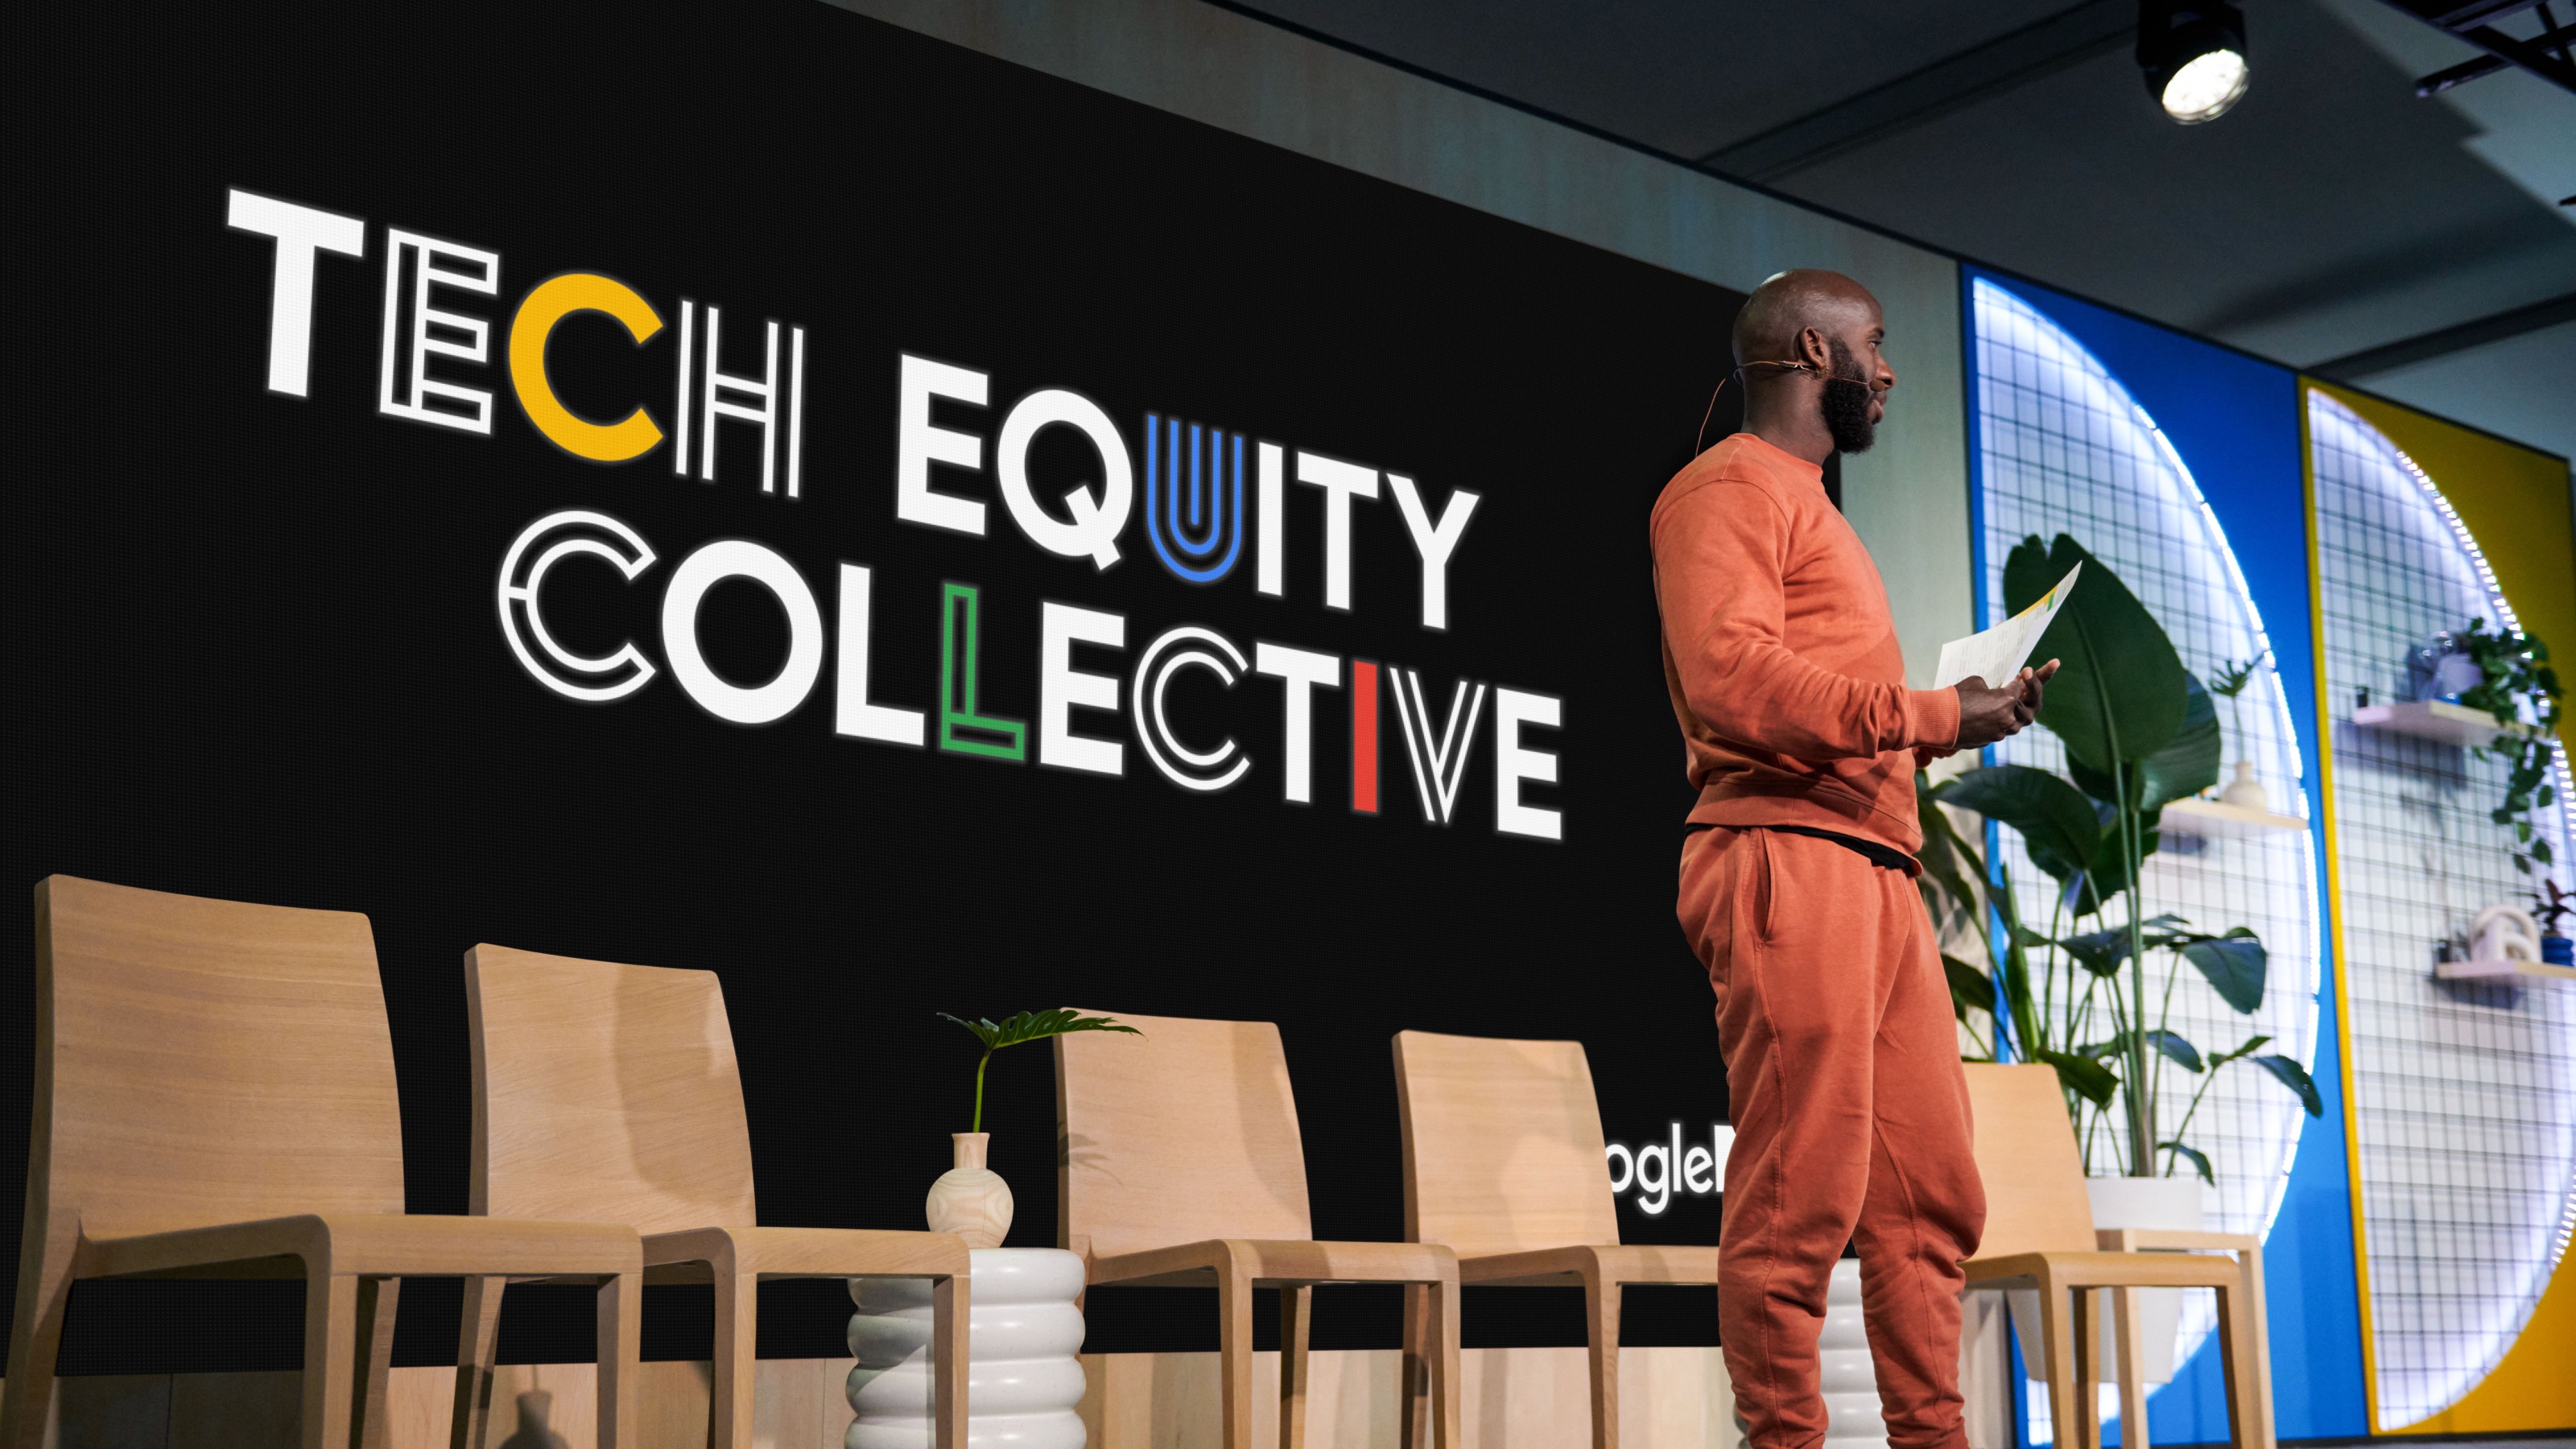 speaker on stage in front of a screen with Tech Equity Collective logo